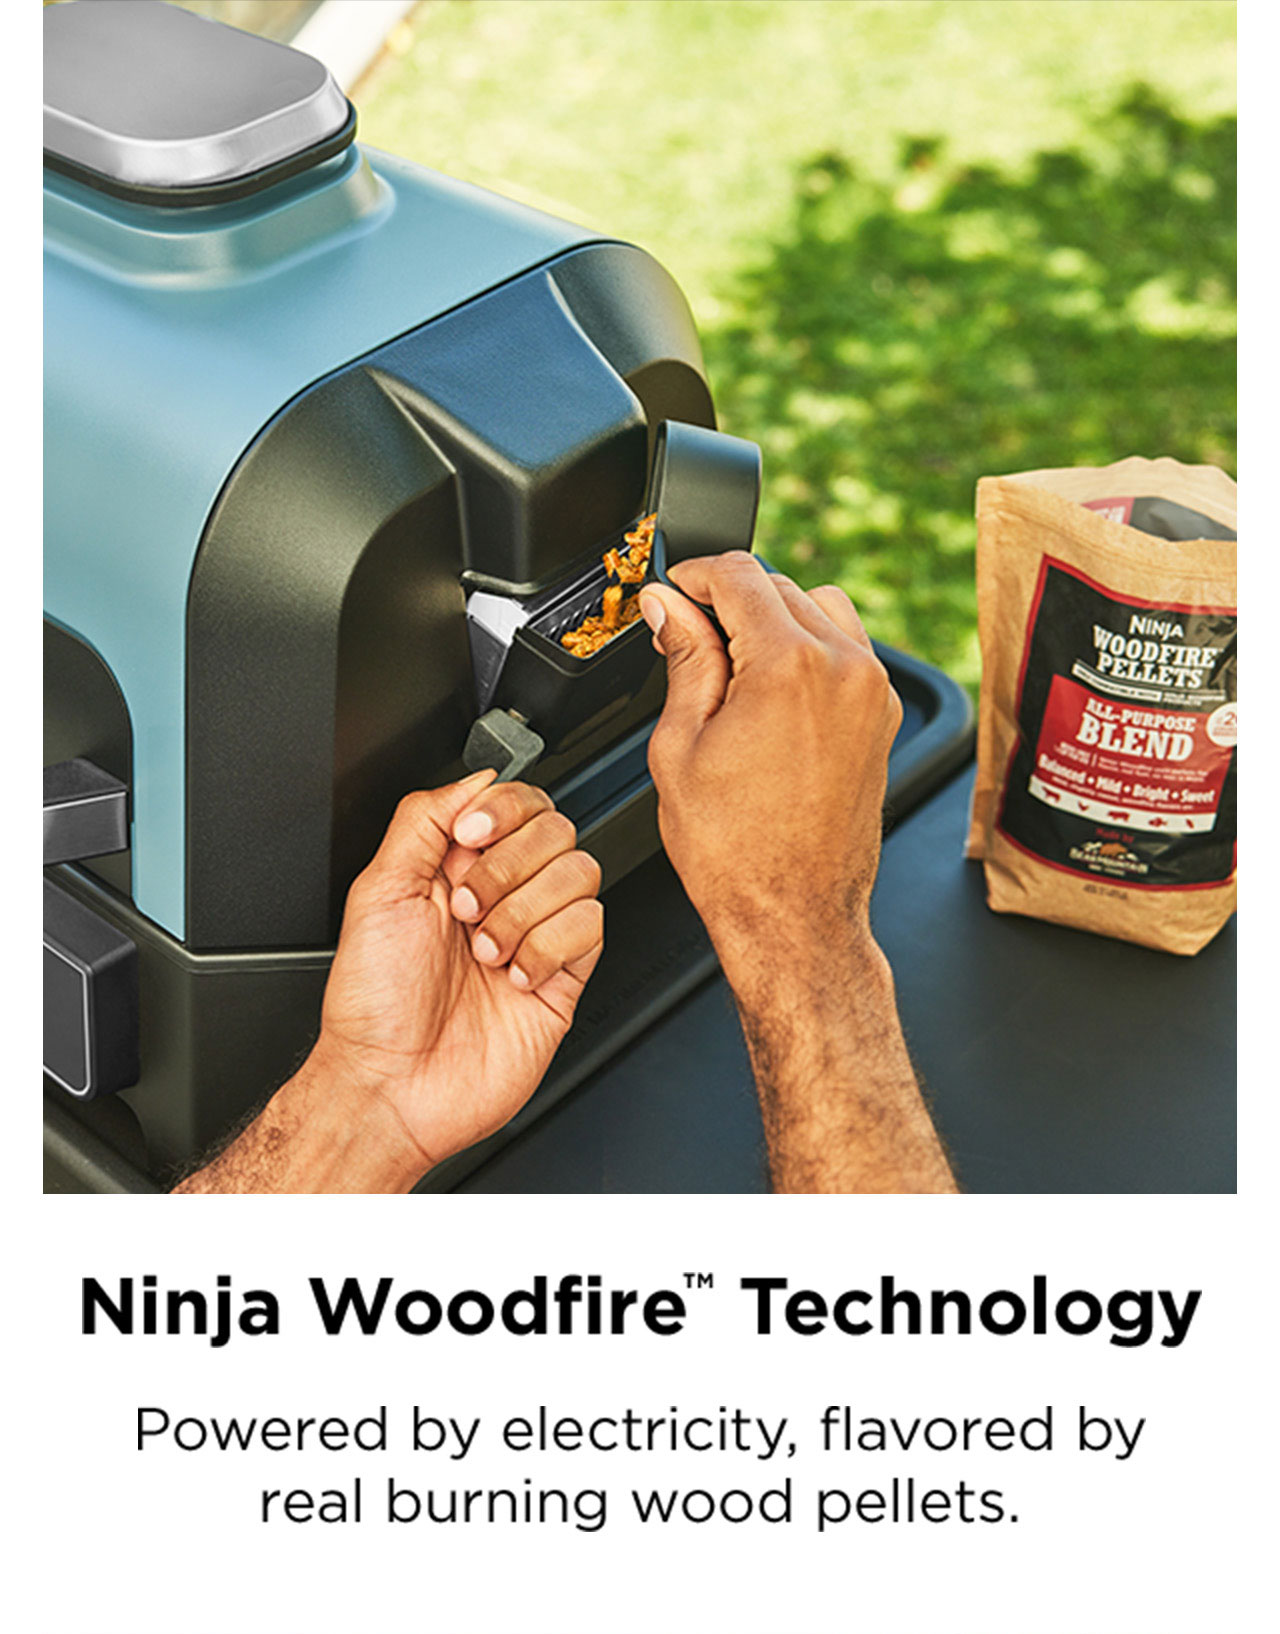 Ninja Woodfire ProConnect XL: Larger and Smarter!